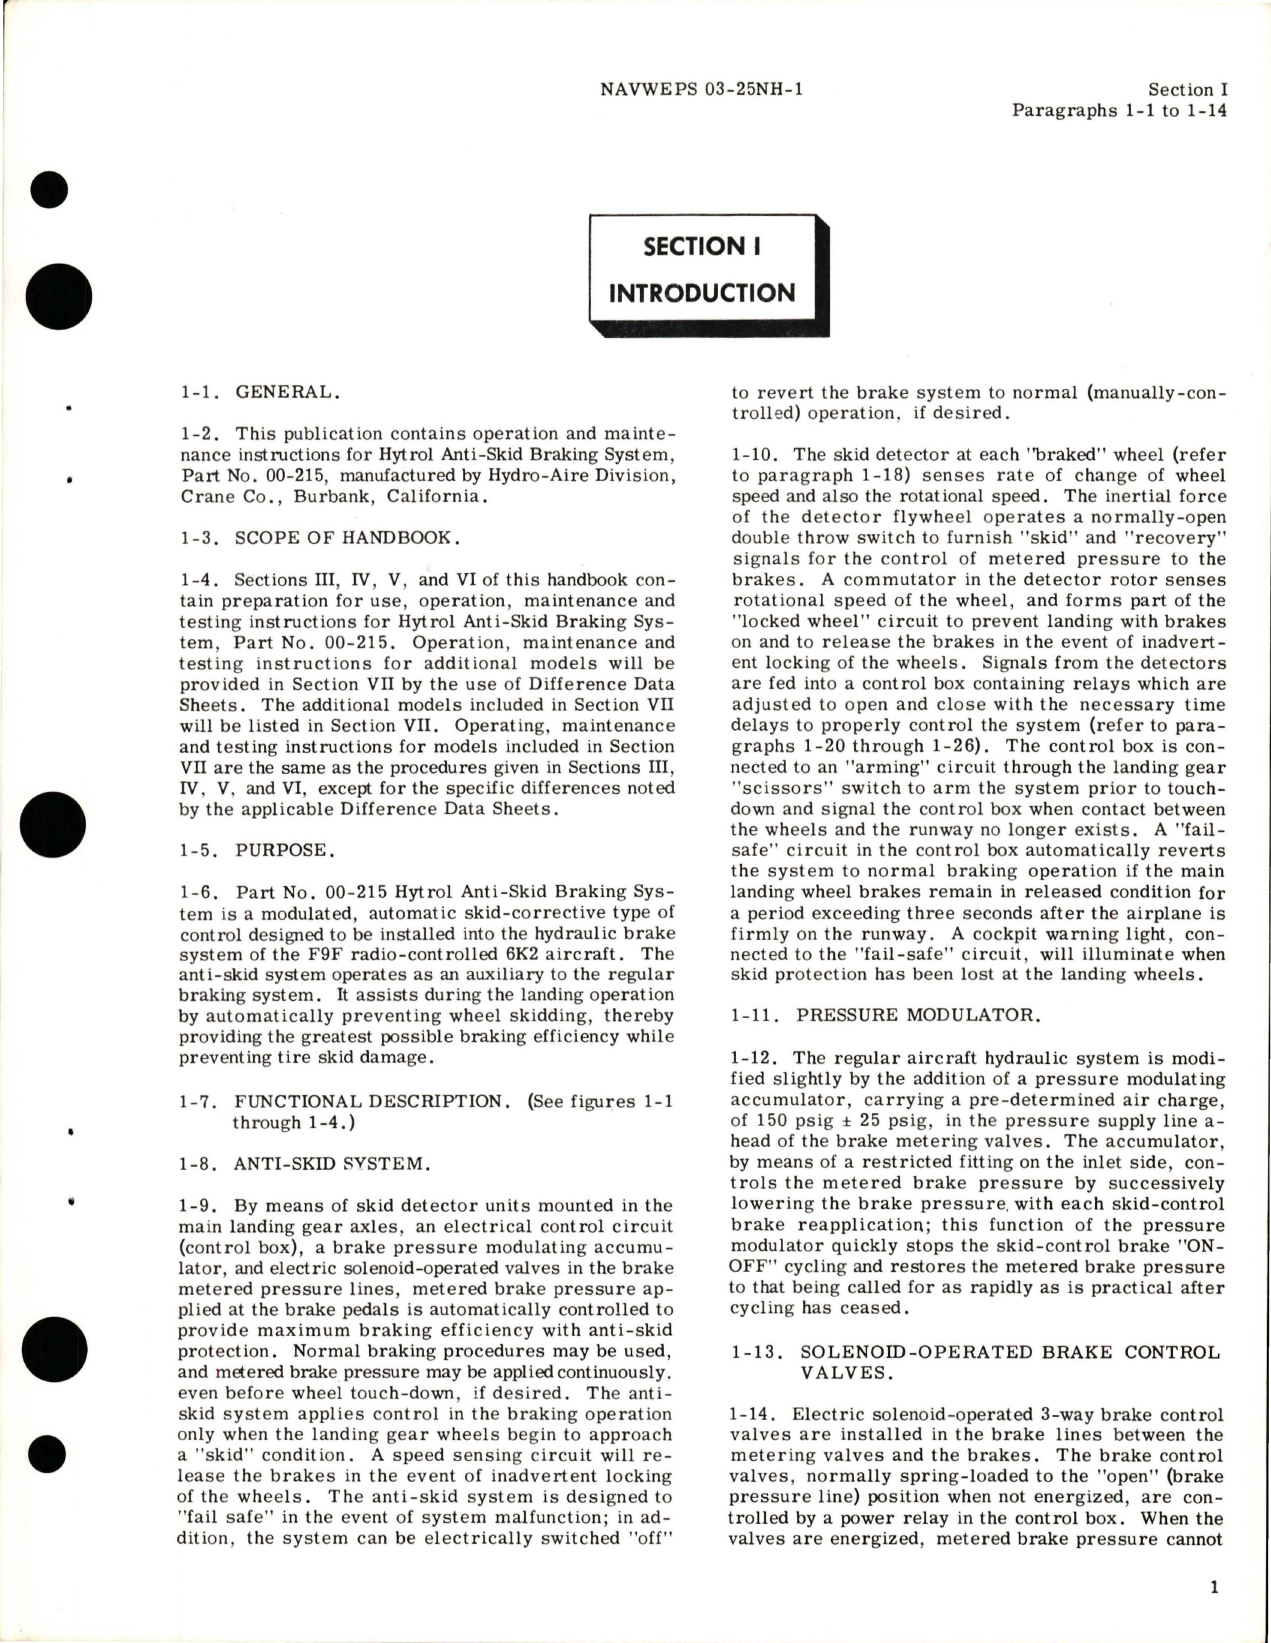 Sample page 5 from AirCorps Library document: Operation and Maintenance Instructions for Hytrol Anti-Skid Braking System - Part 00-215